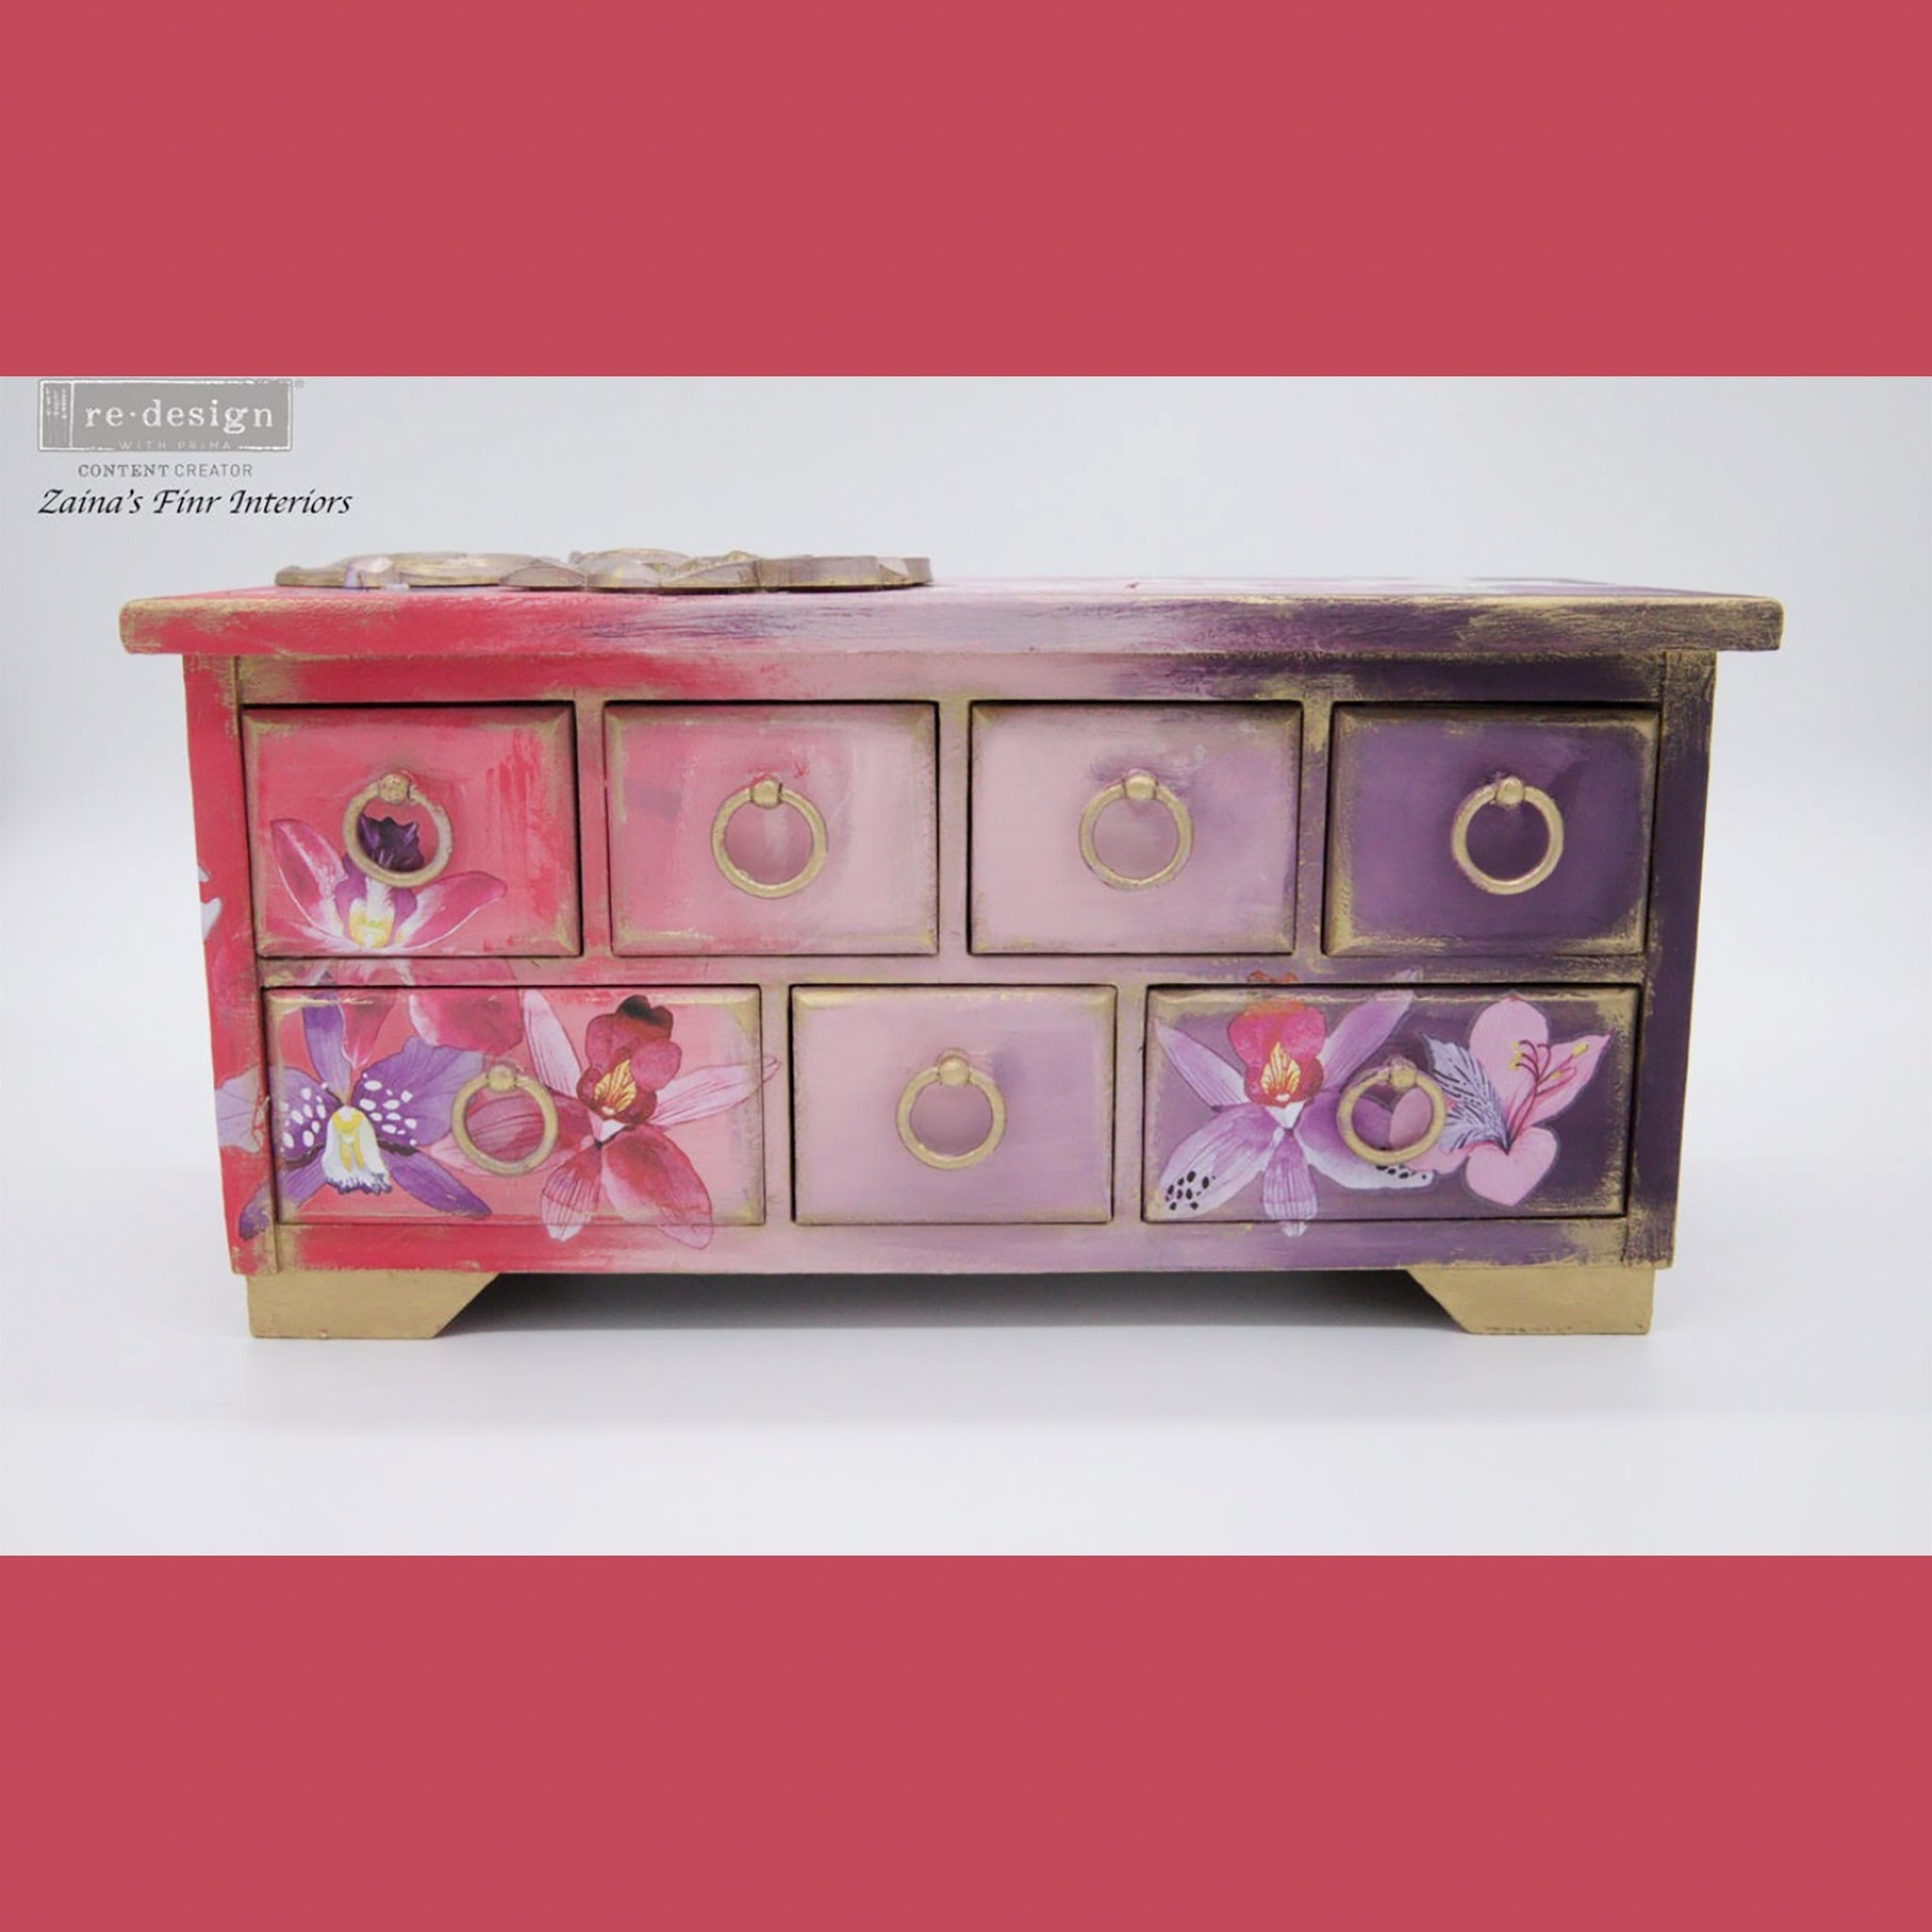 A small jewely box with drawers refurbished by Zaina's Fine Interiors is painted an ombre of coral prink to purple and features ReDesign with Prima's Sunset Tropics small transfer on it. Coral pink borders are on the top and bottom.